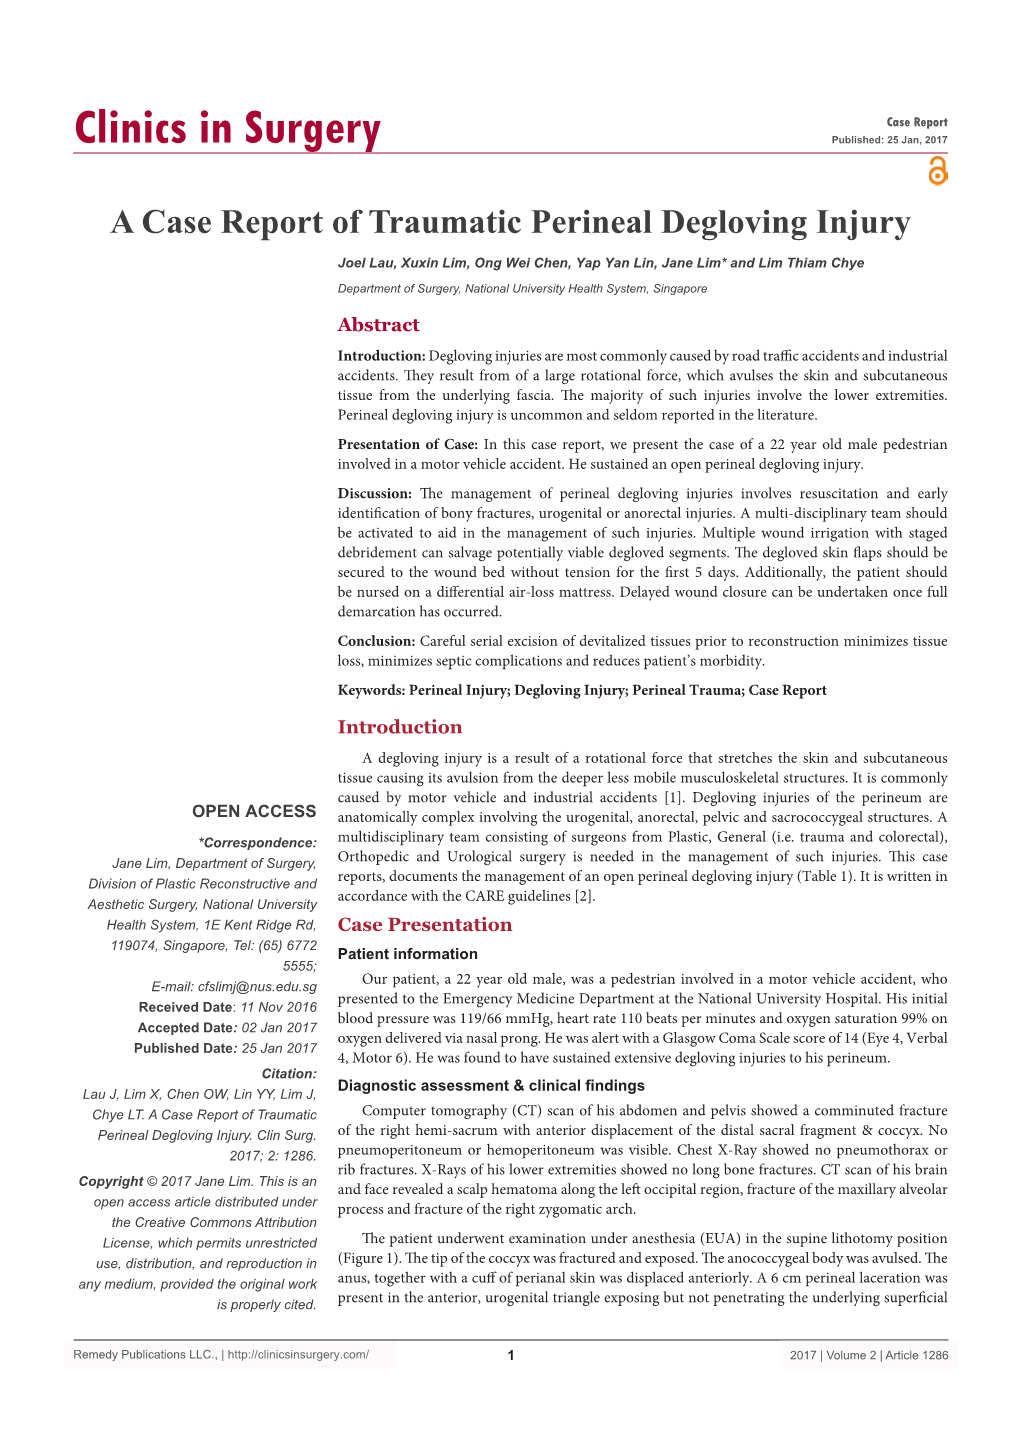 A Case Report of Traumatic Perineal Degloving Injury